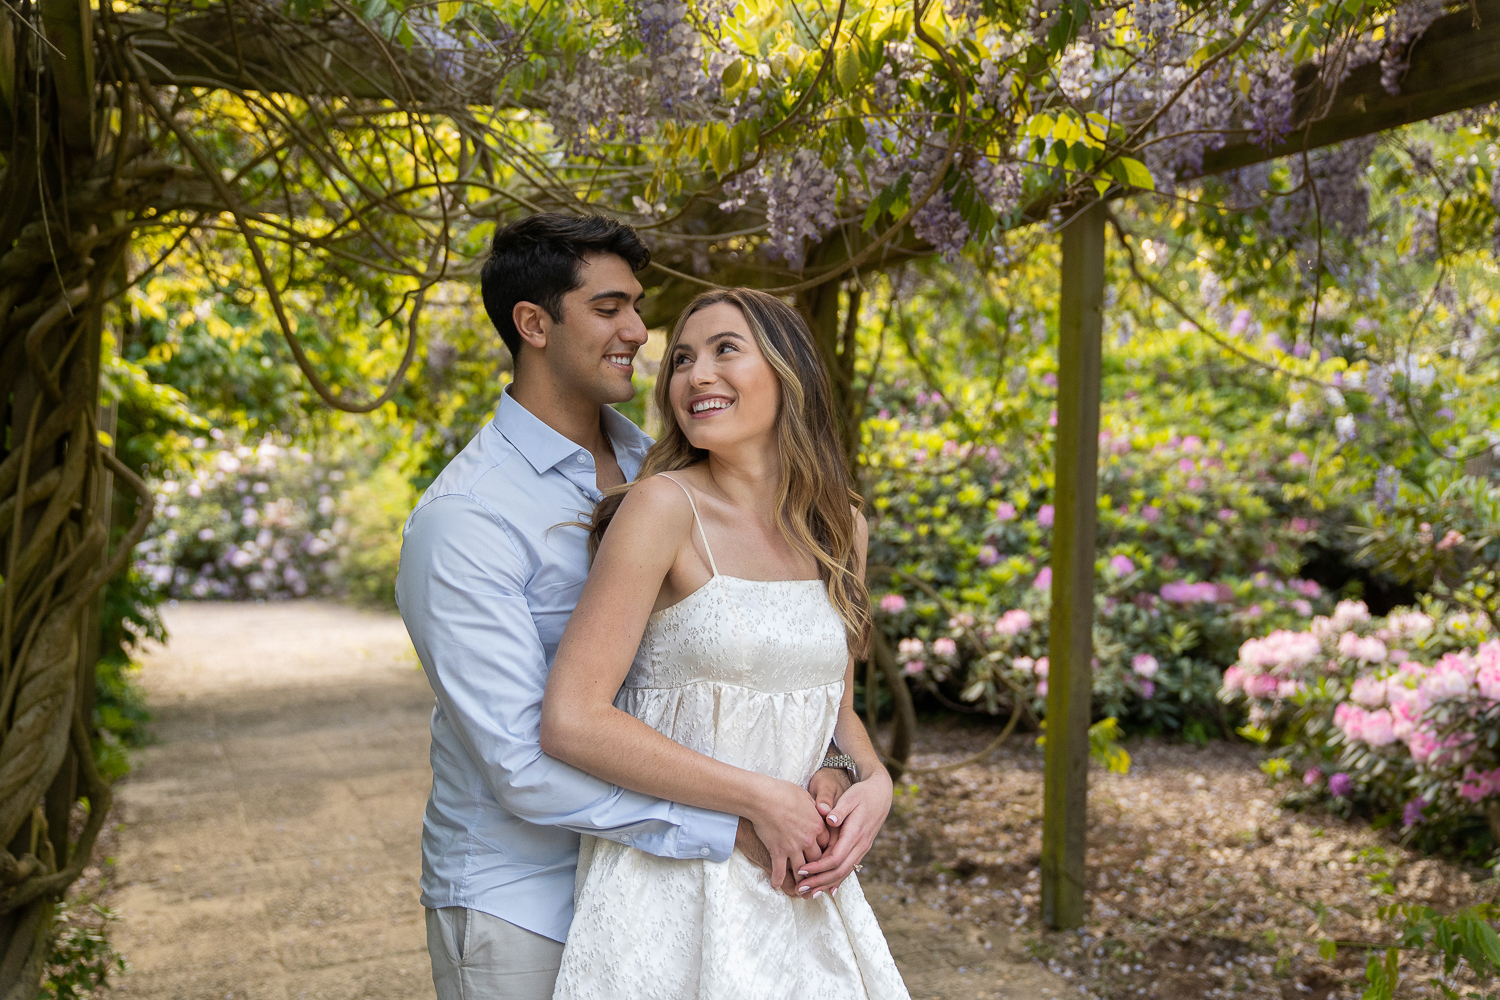 Engagement photo of a cute couple in a park surrounded by purple wisteria and pink flowers.